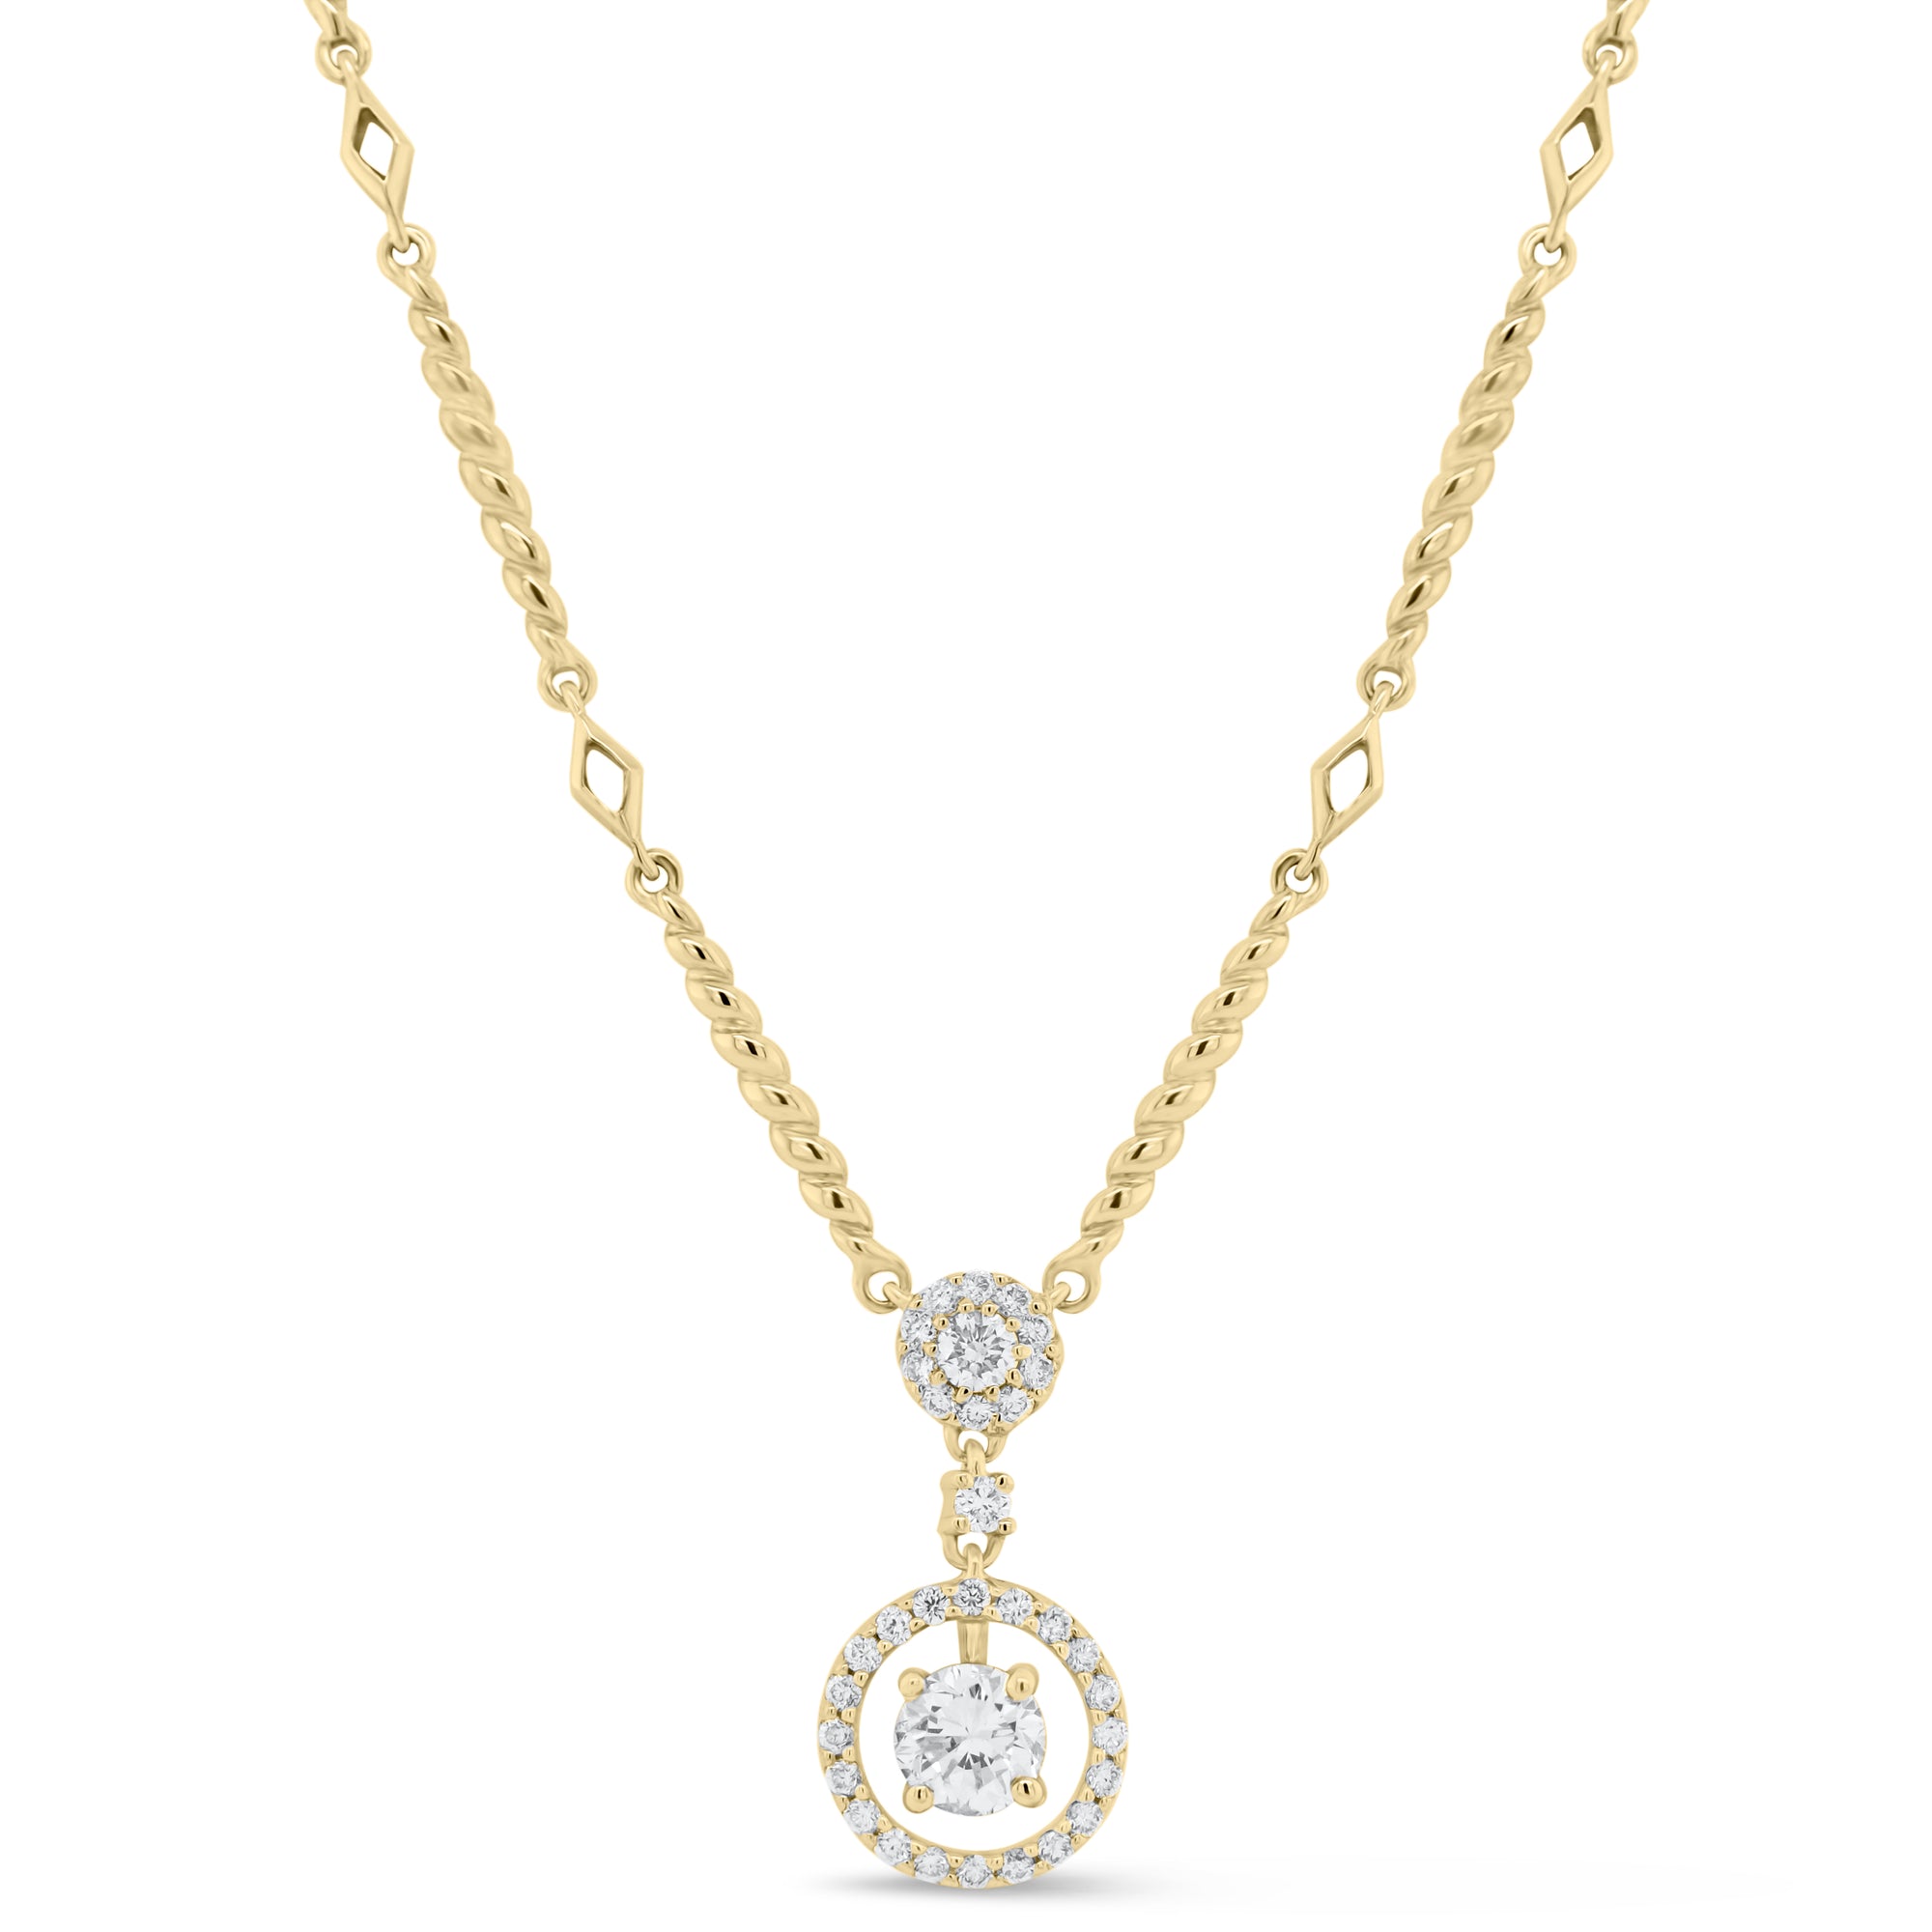 Diamond Halo Necklace with Twist Links - 18K white gold weighing 7.42 grams - 32 round diamonds totaling 0.32 carats - 0.45 ct diamond (GIA-graded G-color, SI1 clarity)